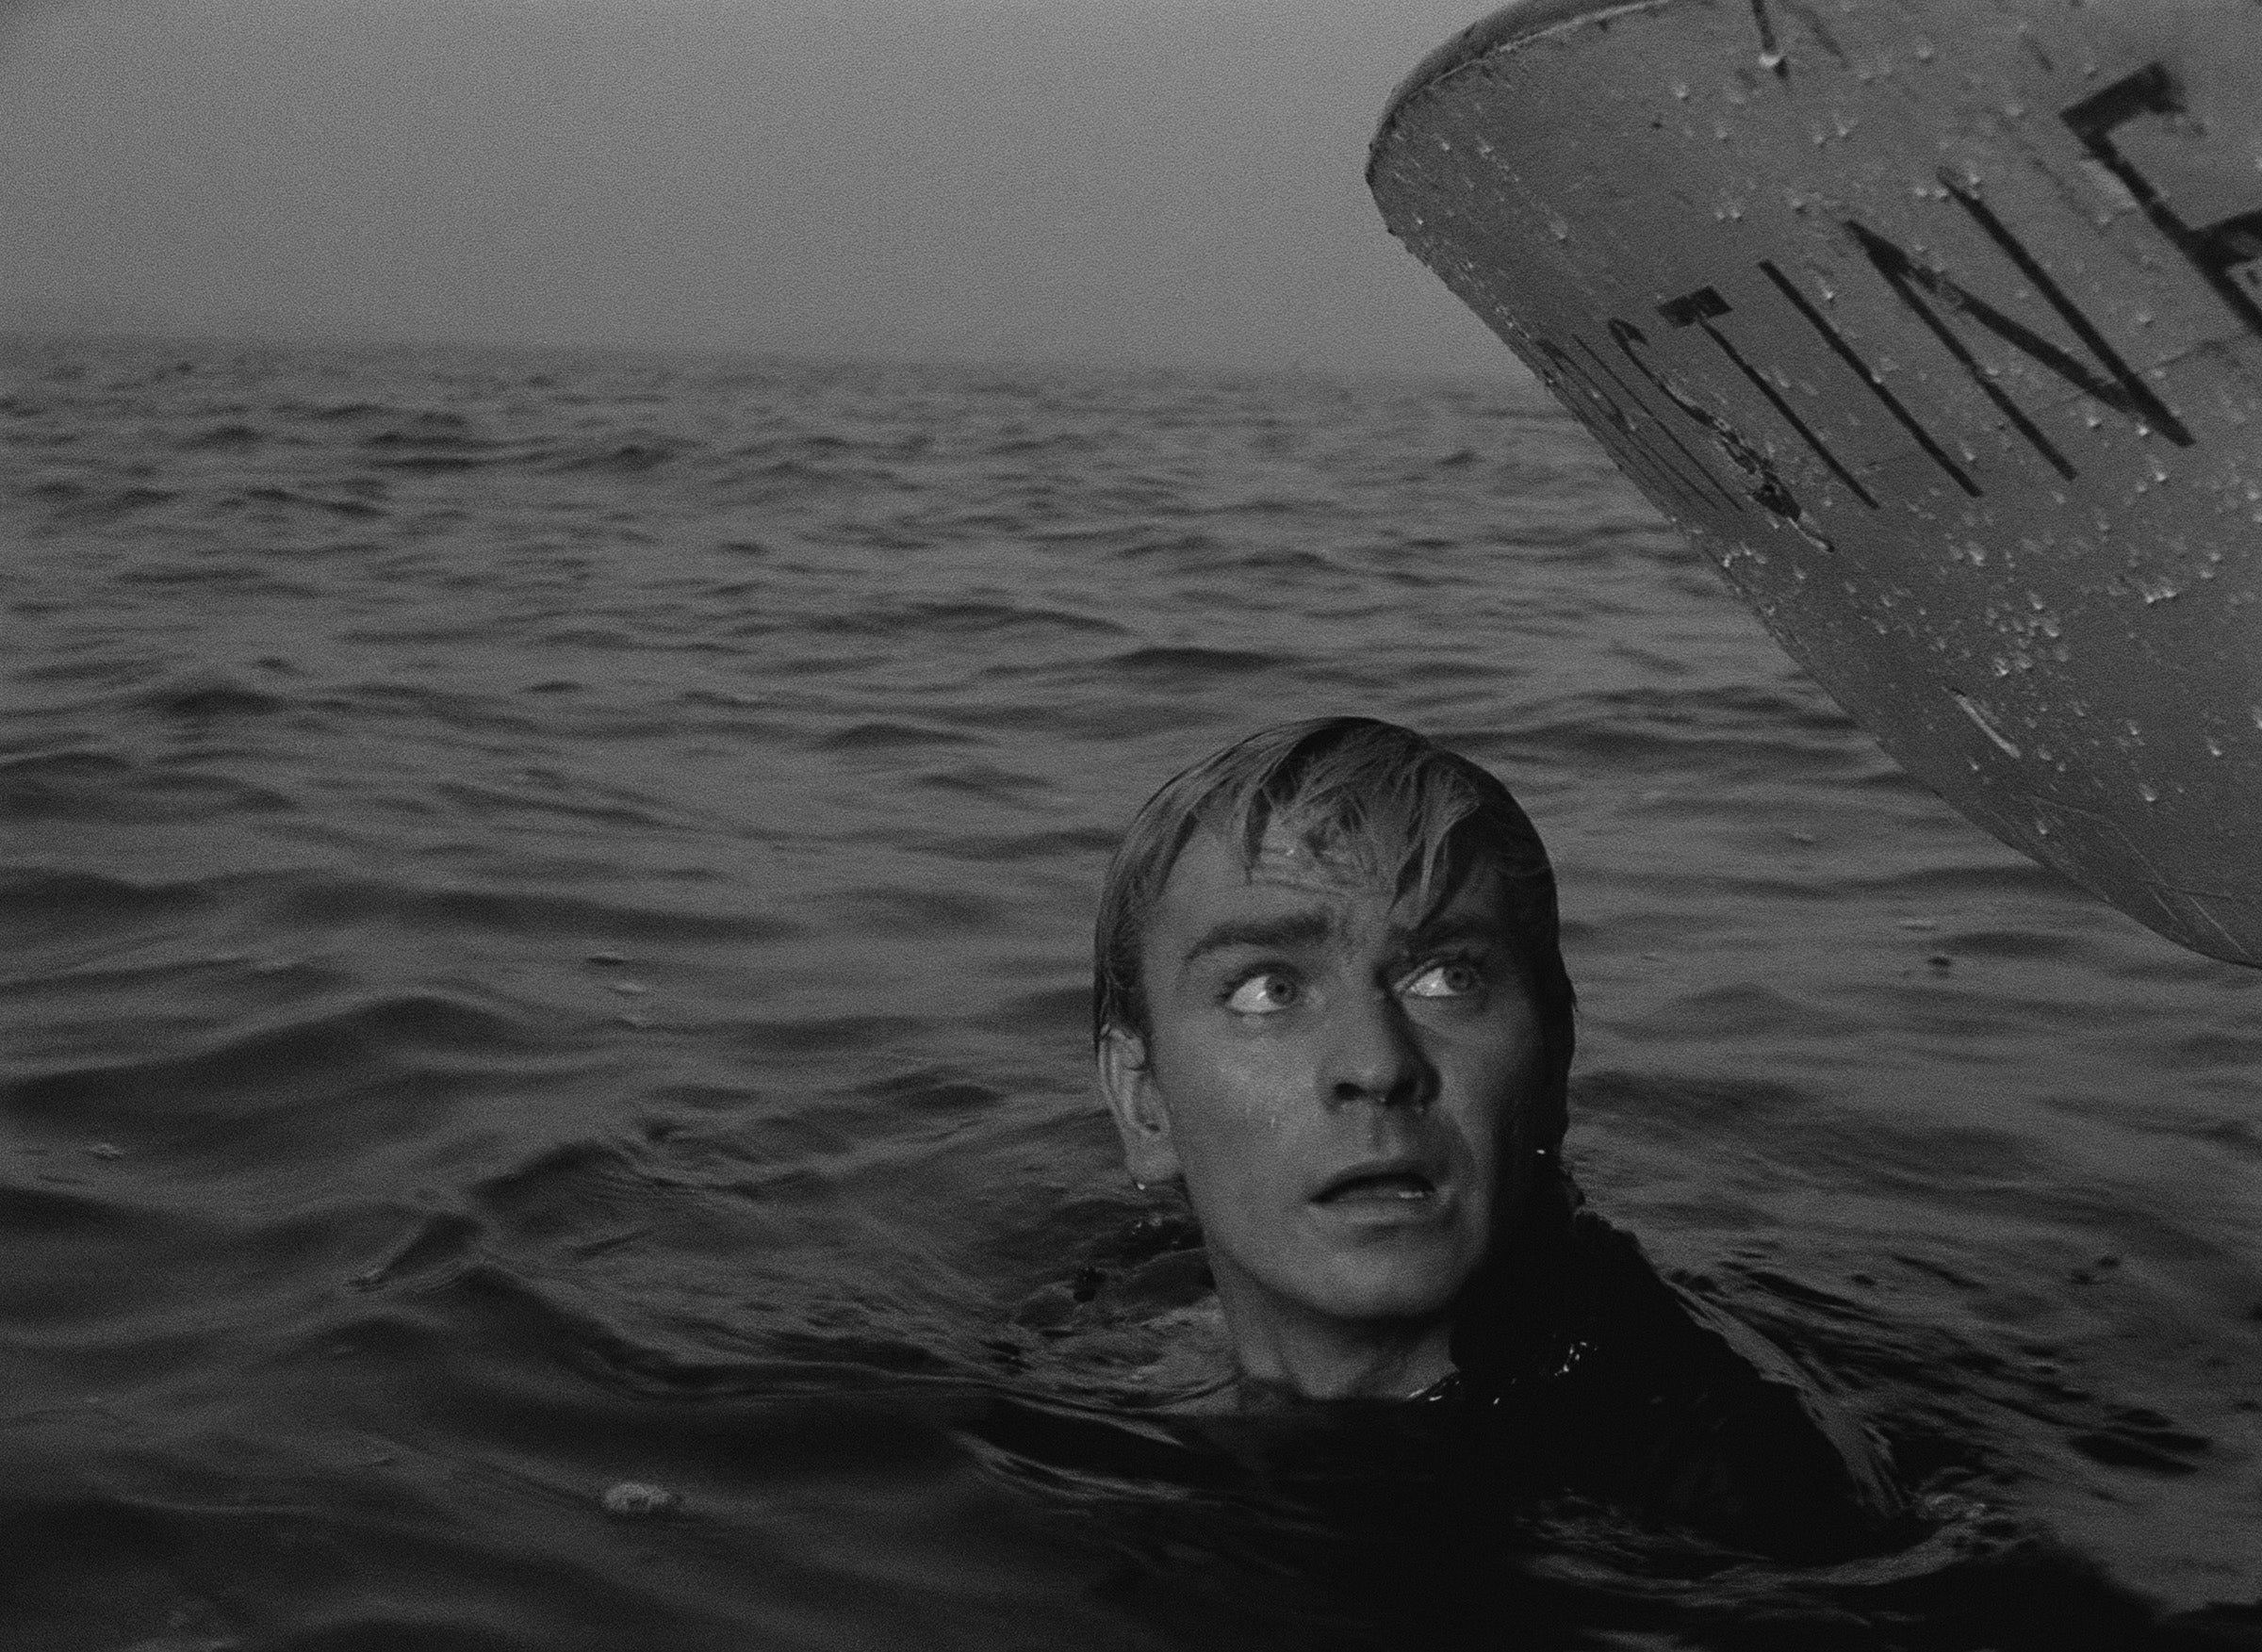 The Knife in the Water by Roman Polanski